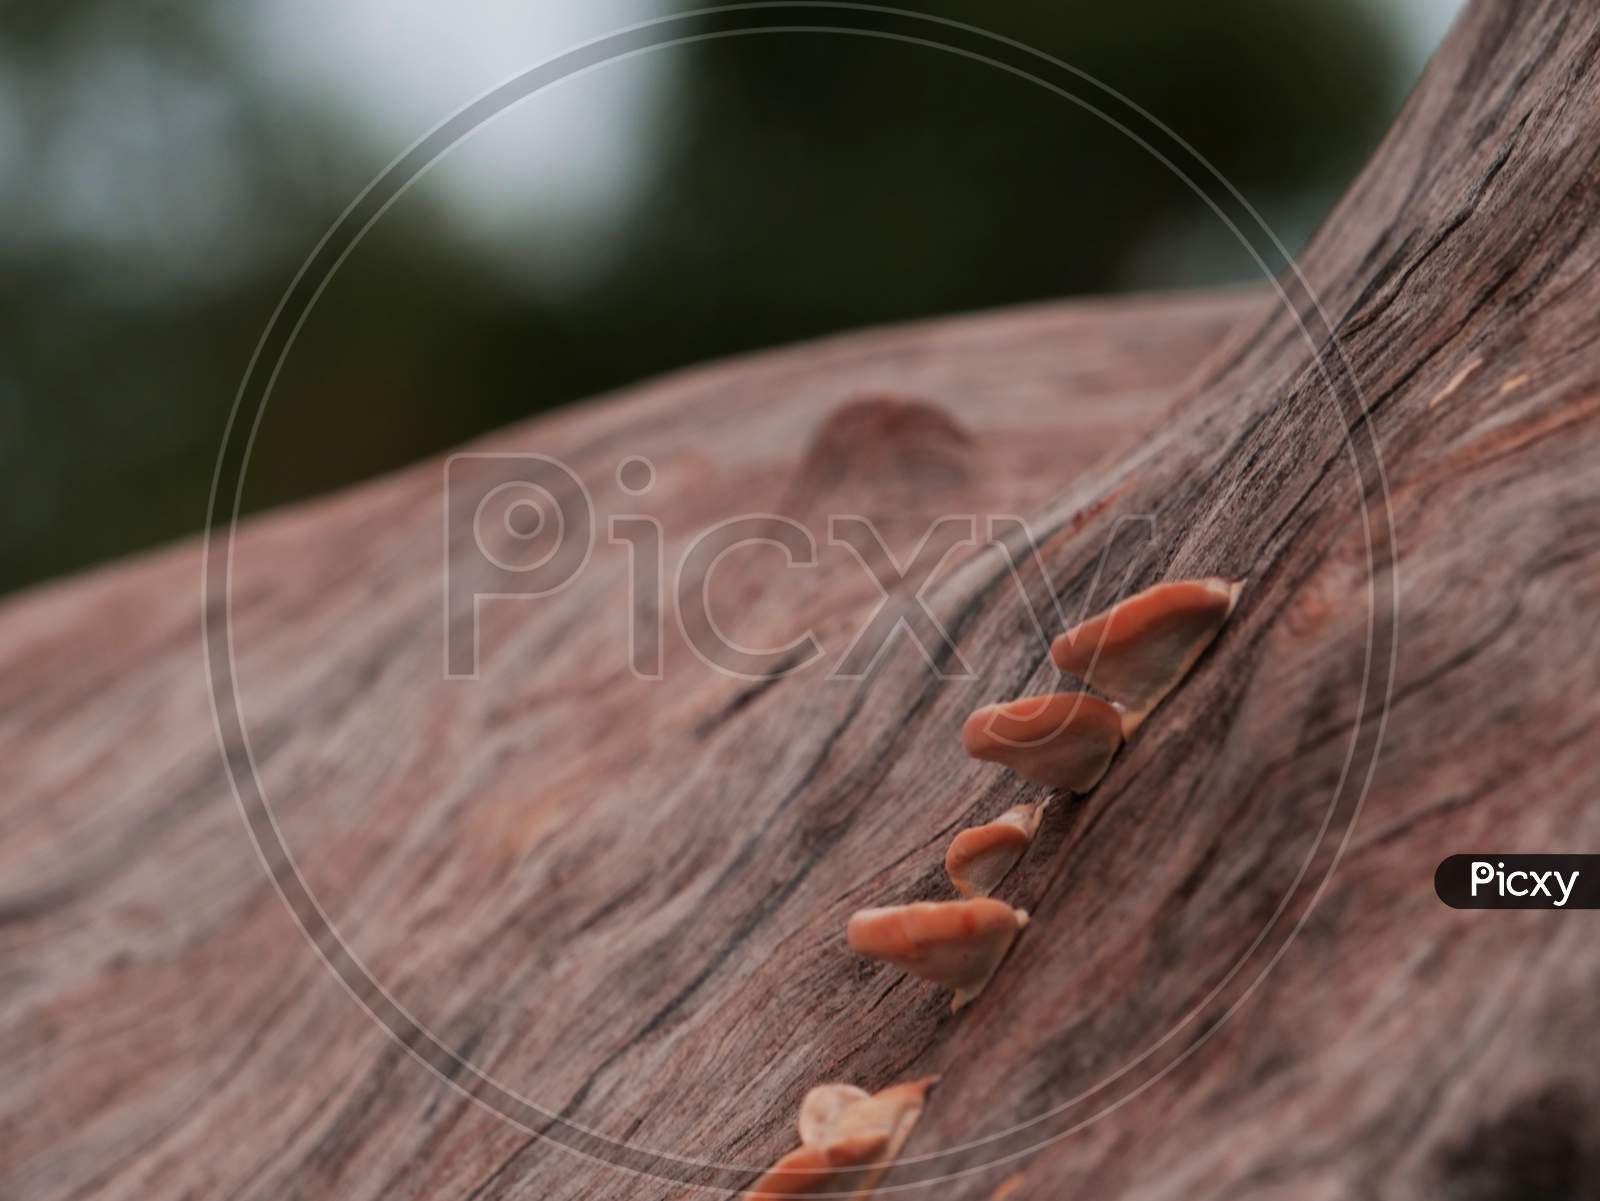 Termite Nest Presented On Tree Wood Trunk Behind Natural Environment Background.